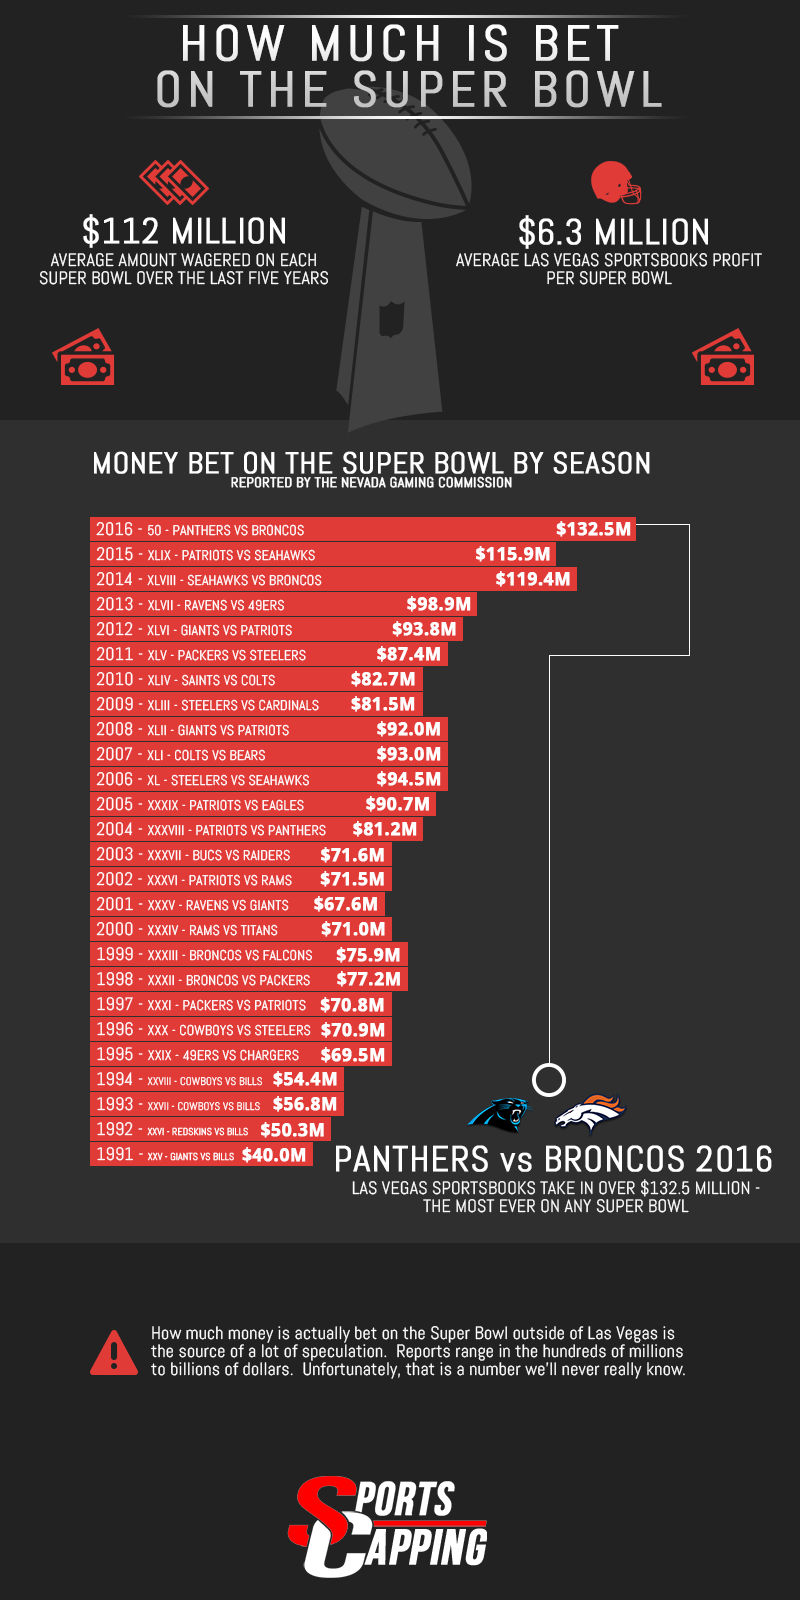 How much money is bet on the Super Bowl each year.